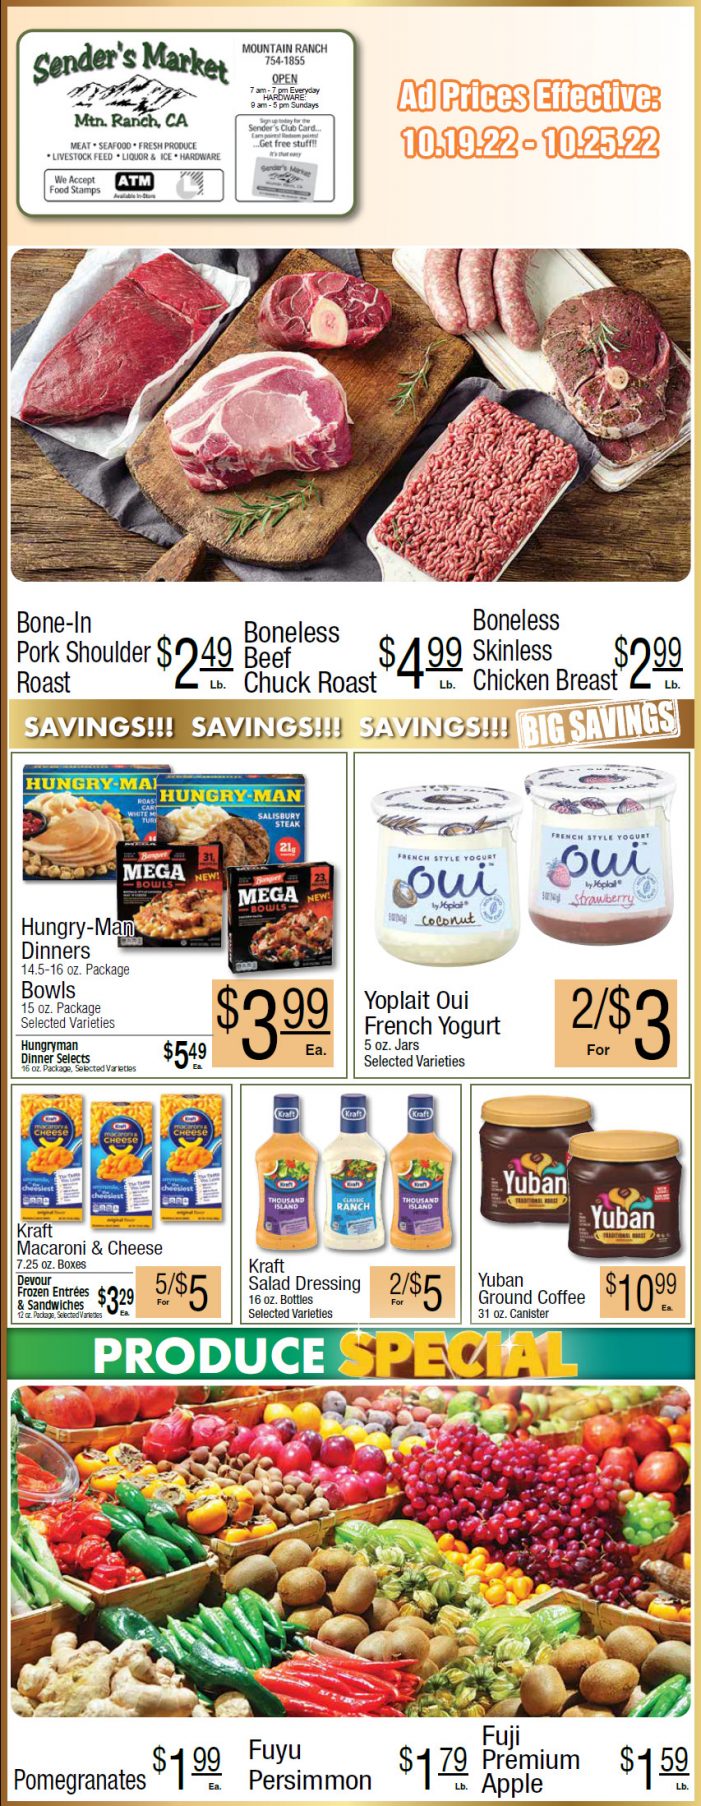 Sender’s Market Weekly Ad & Grocery Specials Through October 11th. Shop Local & Save!